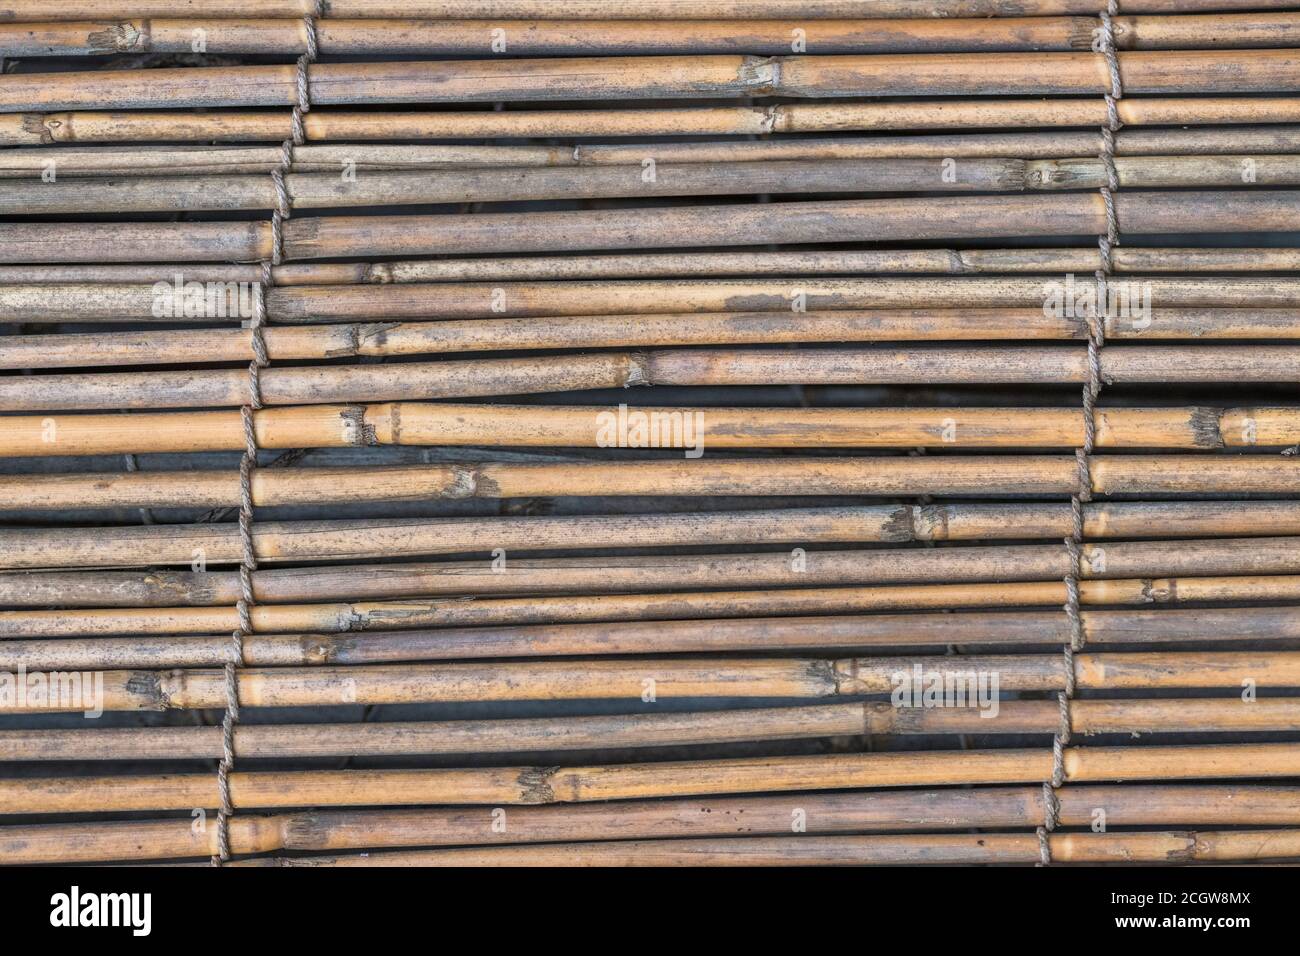 Flat lying section of natural reed garden screening, showing traces of early reed decay. Nice natural texture background or metaphor for gardening. Stock Photo